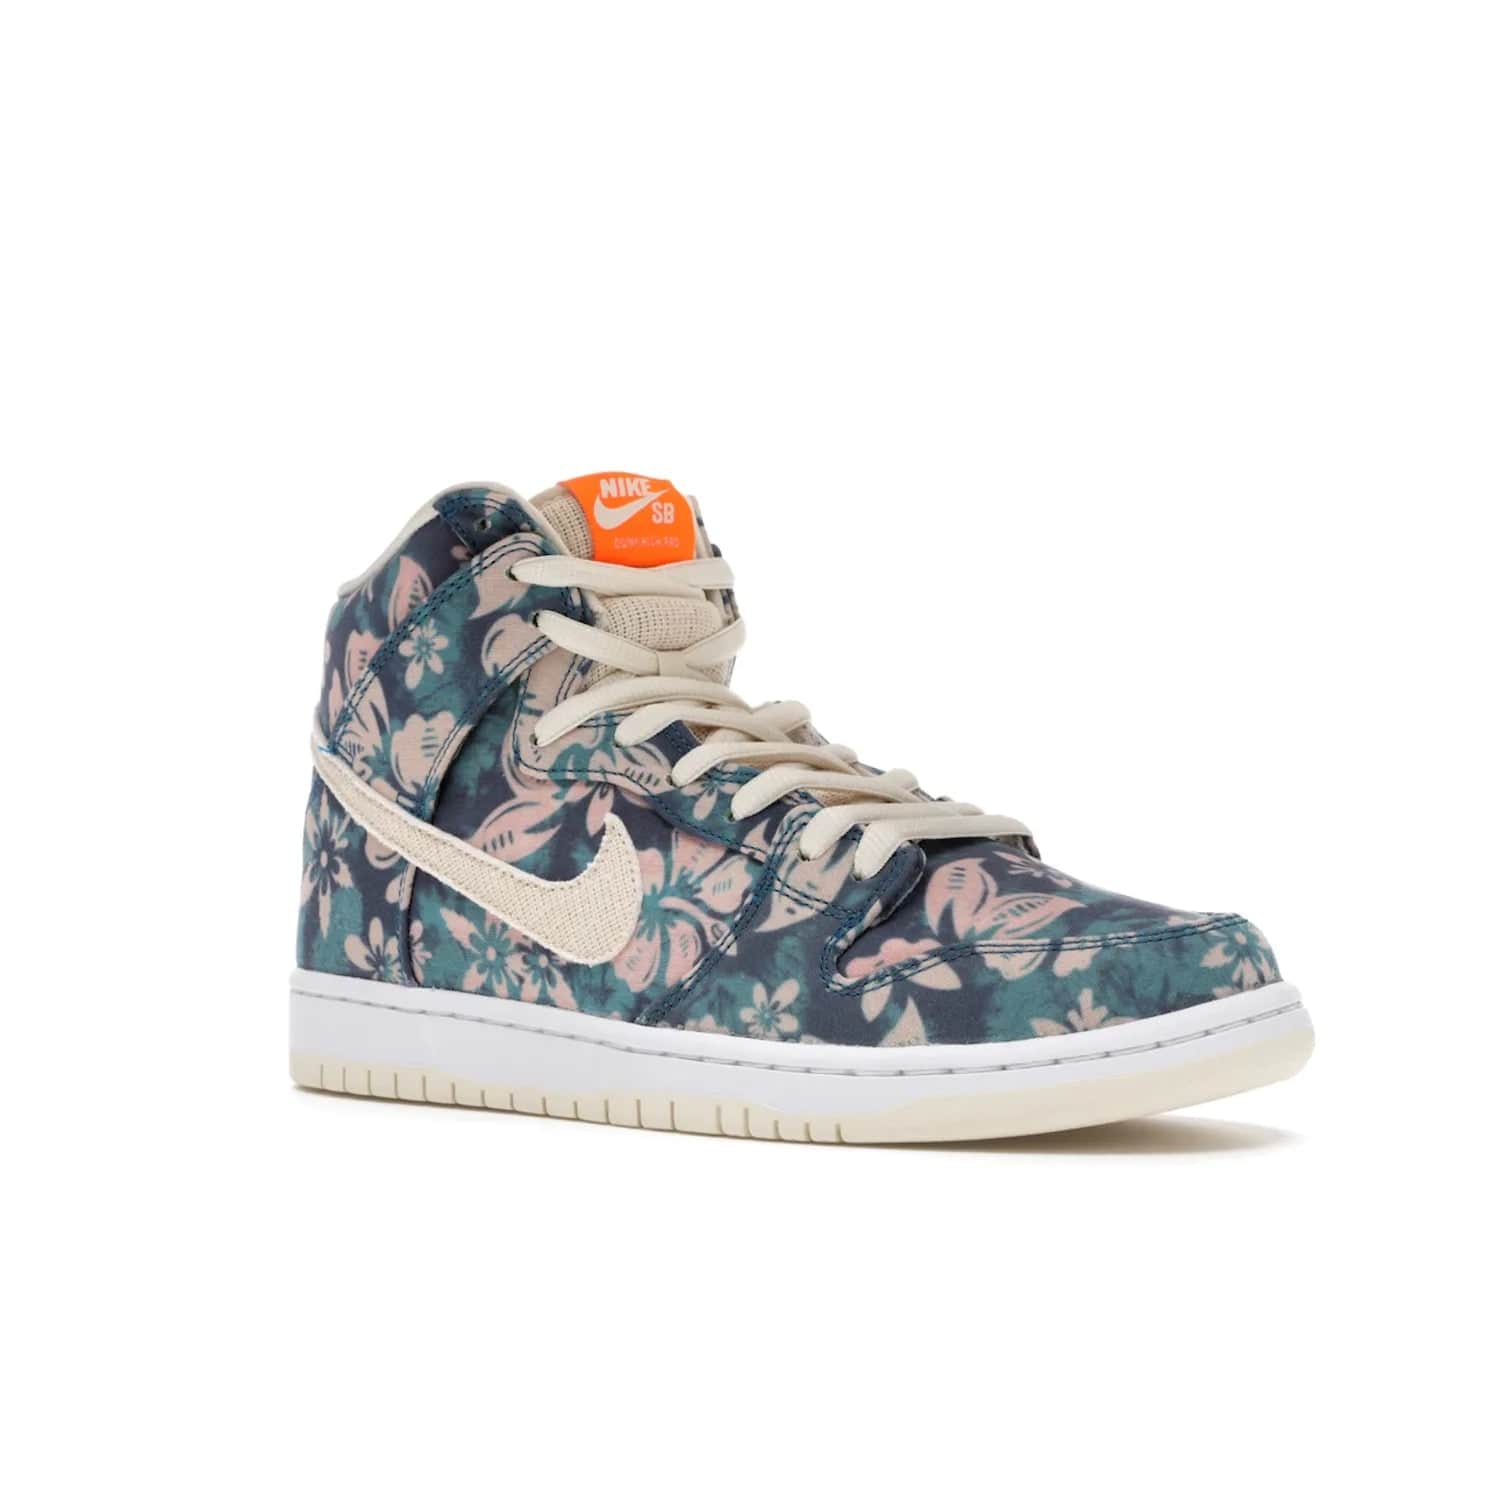 Nike SB Dunk High Hawaii - Image 5 - Only at www.BallersClubKickz.com - Introducing the Nike SB Dunk High Hawaii, a colorway celebrating an island paradise. This hybrid silhouette brings together tropical vibes with a sun-soaked look. Blue, green, pink and orange on a sail and white outsole. Get your island vibes with the Nike SB Dunk High Hawaii.